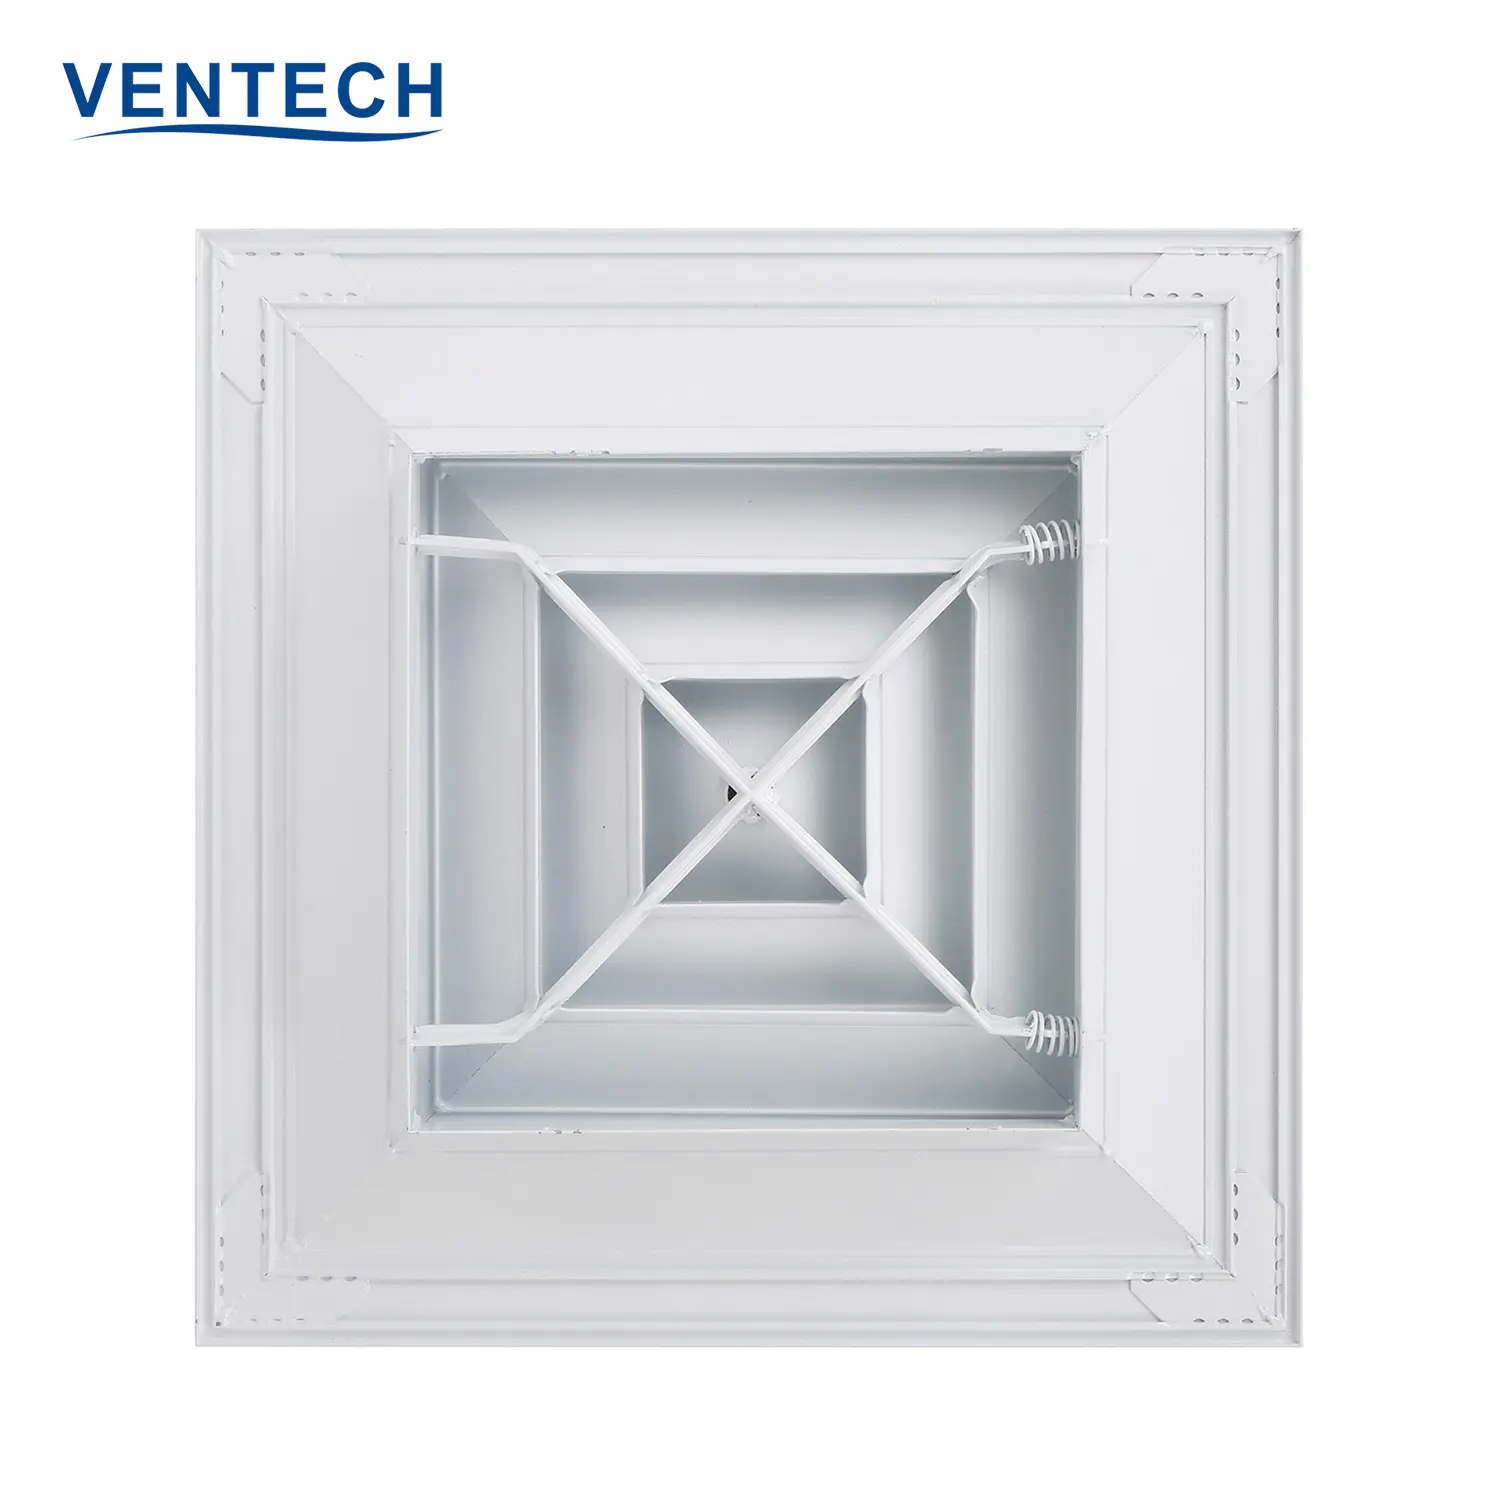 Hvac VENTECH Aluminum Exhaust Outlet Air Conditioner 4 Way Supply Square Ceiling Air Diffuser